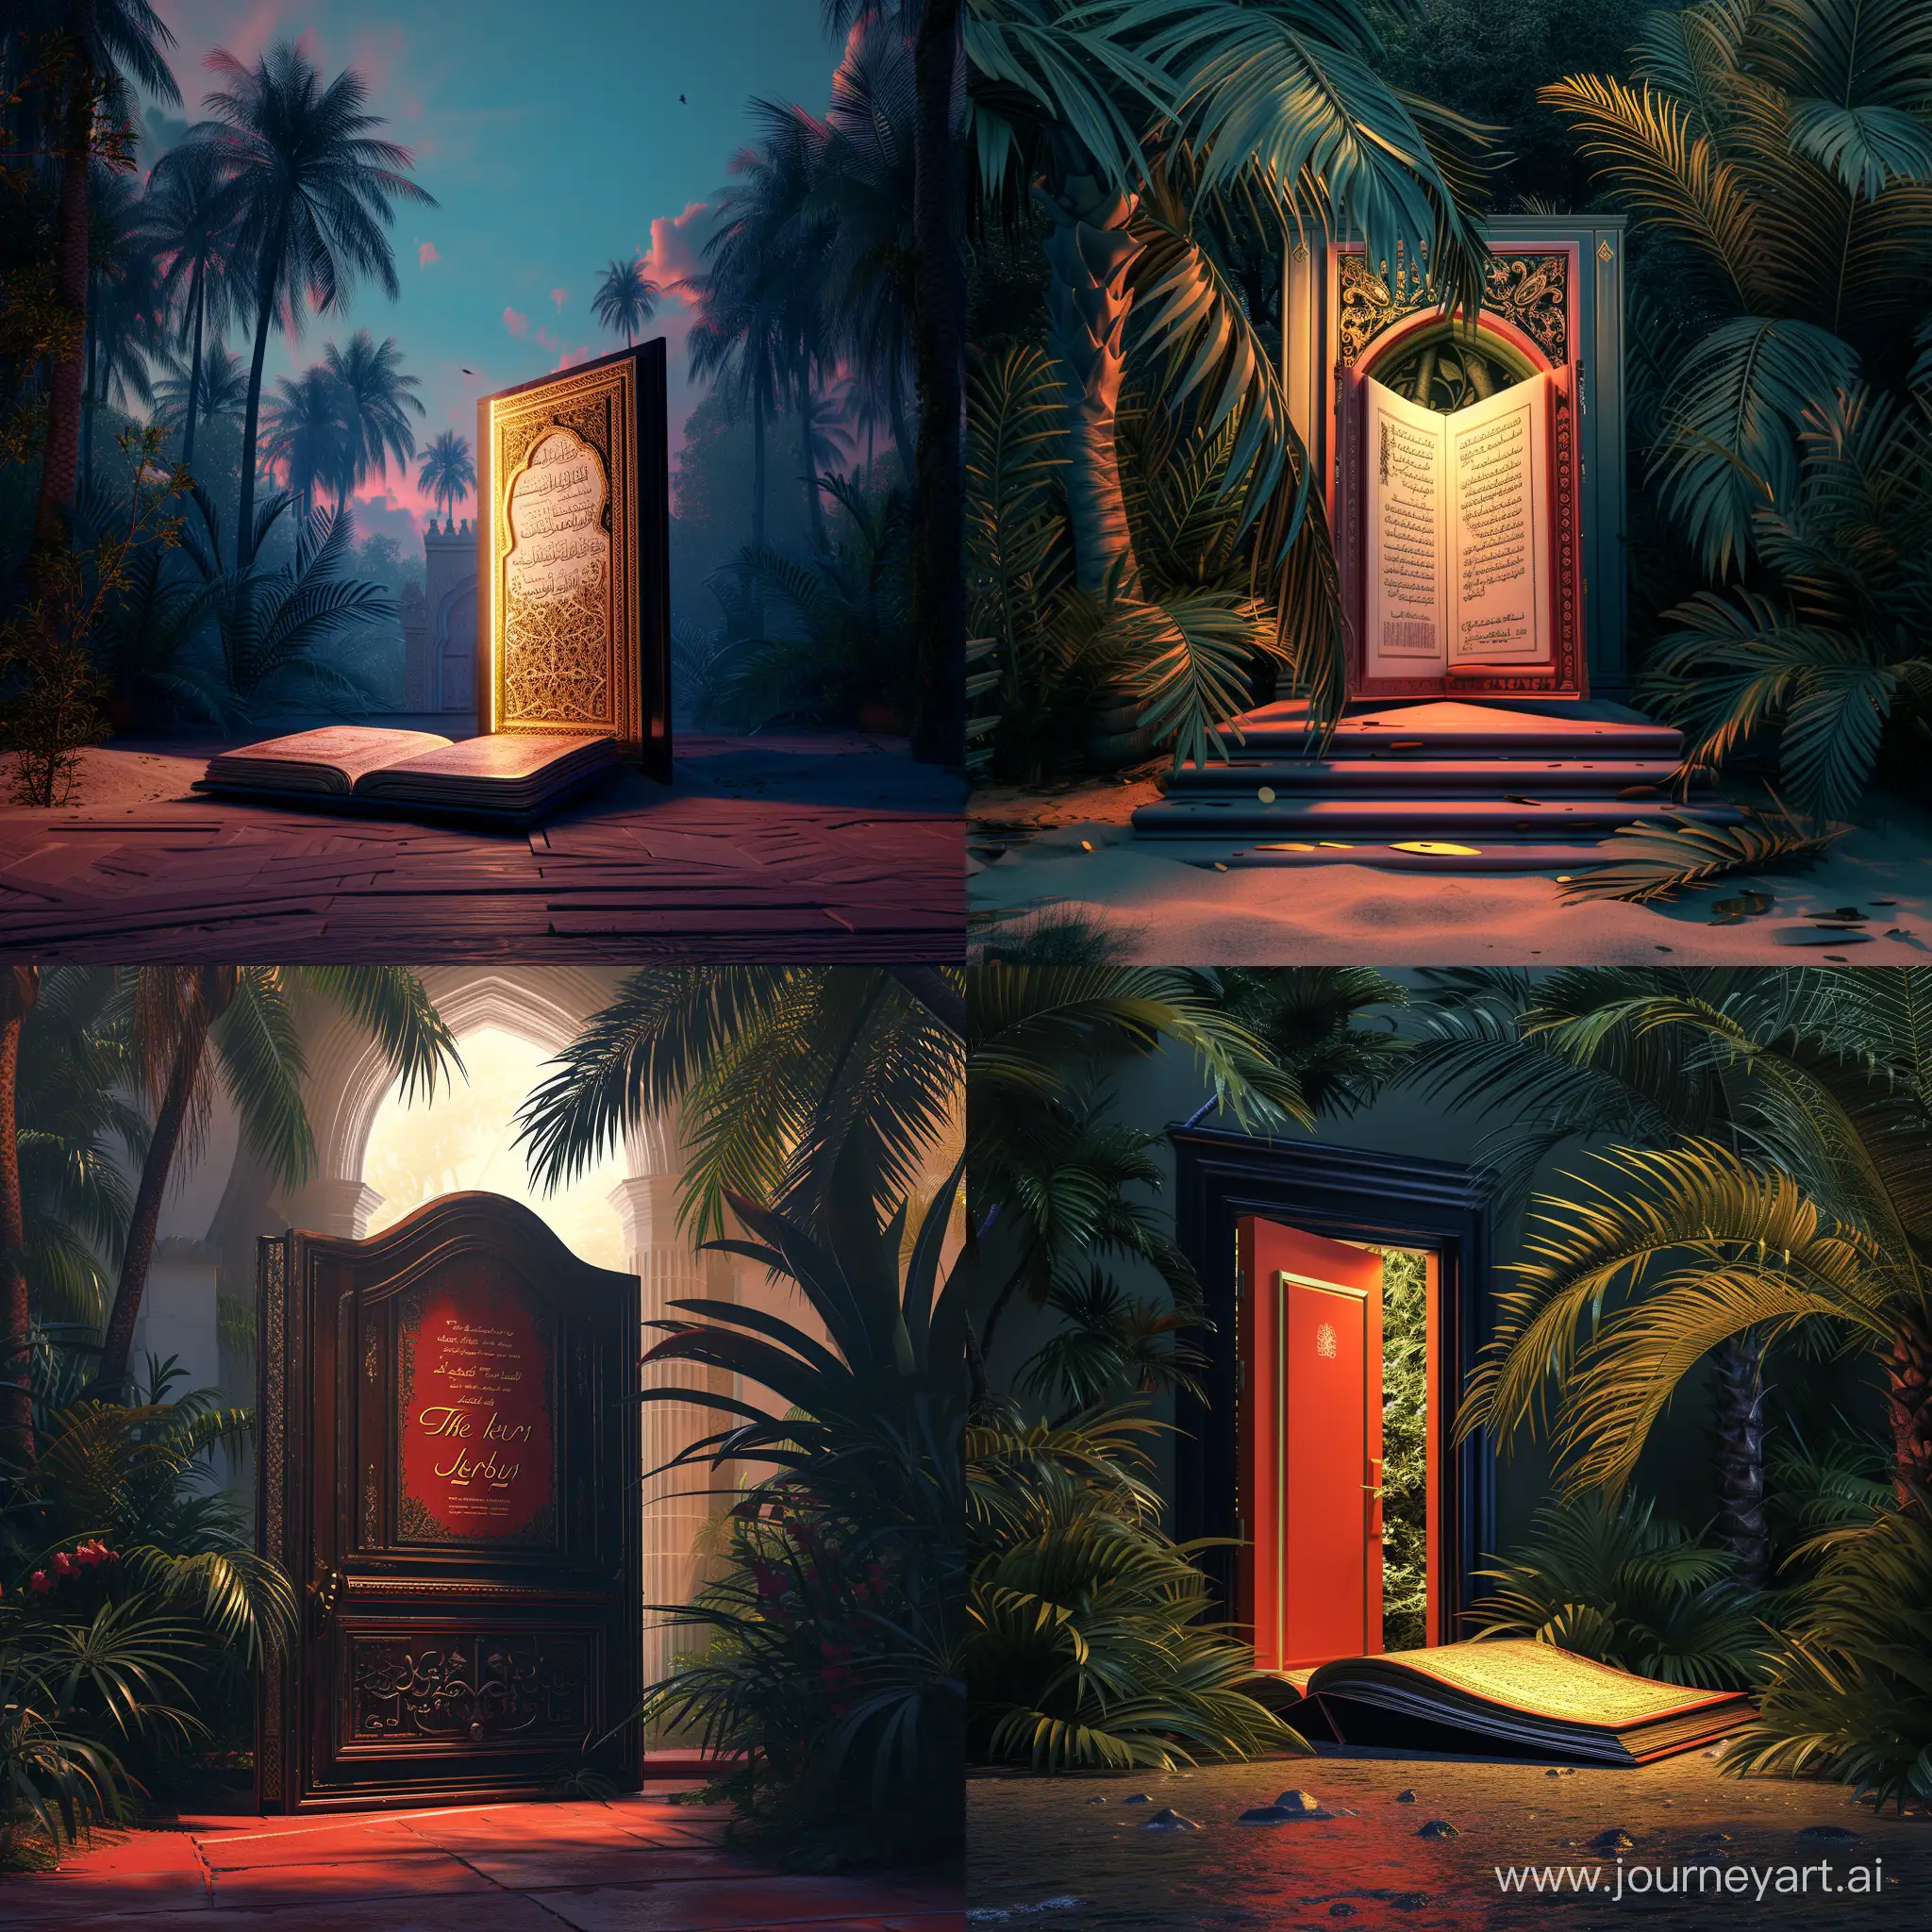 Illustrated-Storybook-Opening-Door-Amid-Palm-Trees-in-Photorealistic-Style